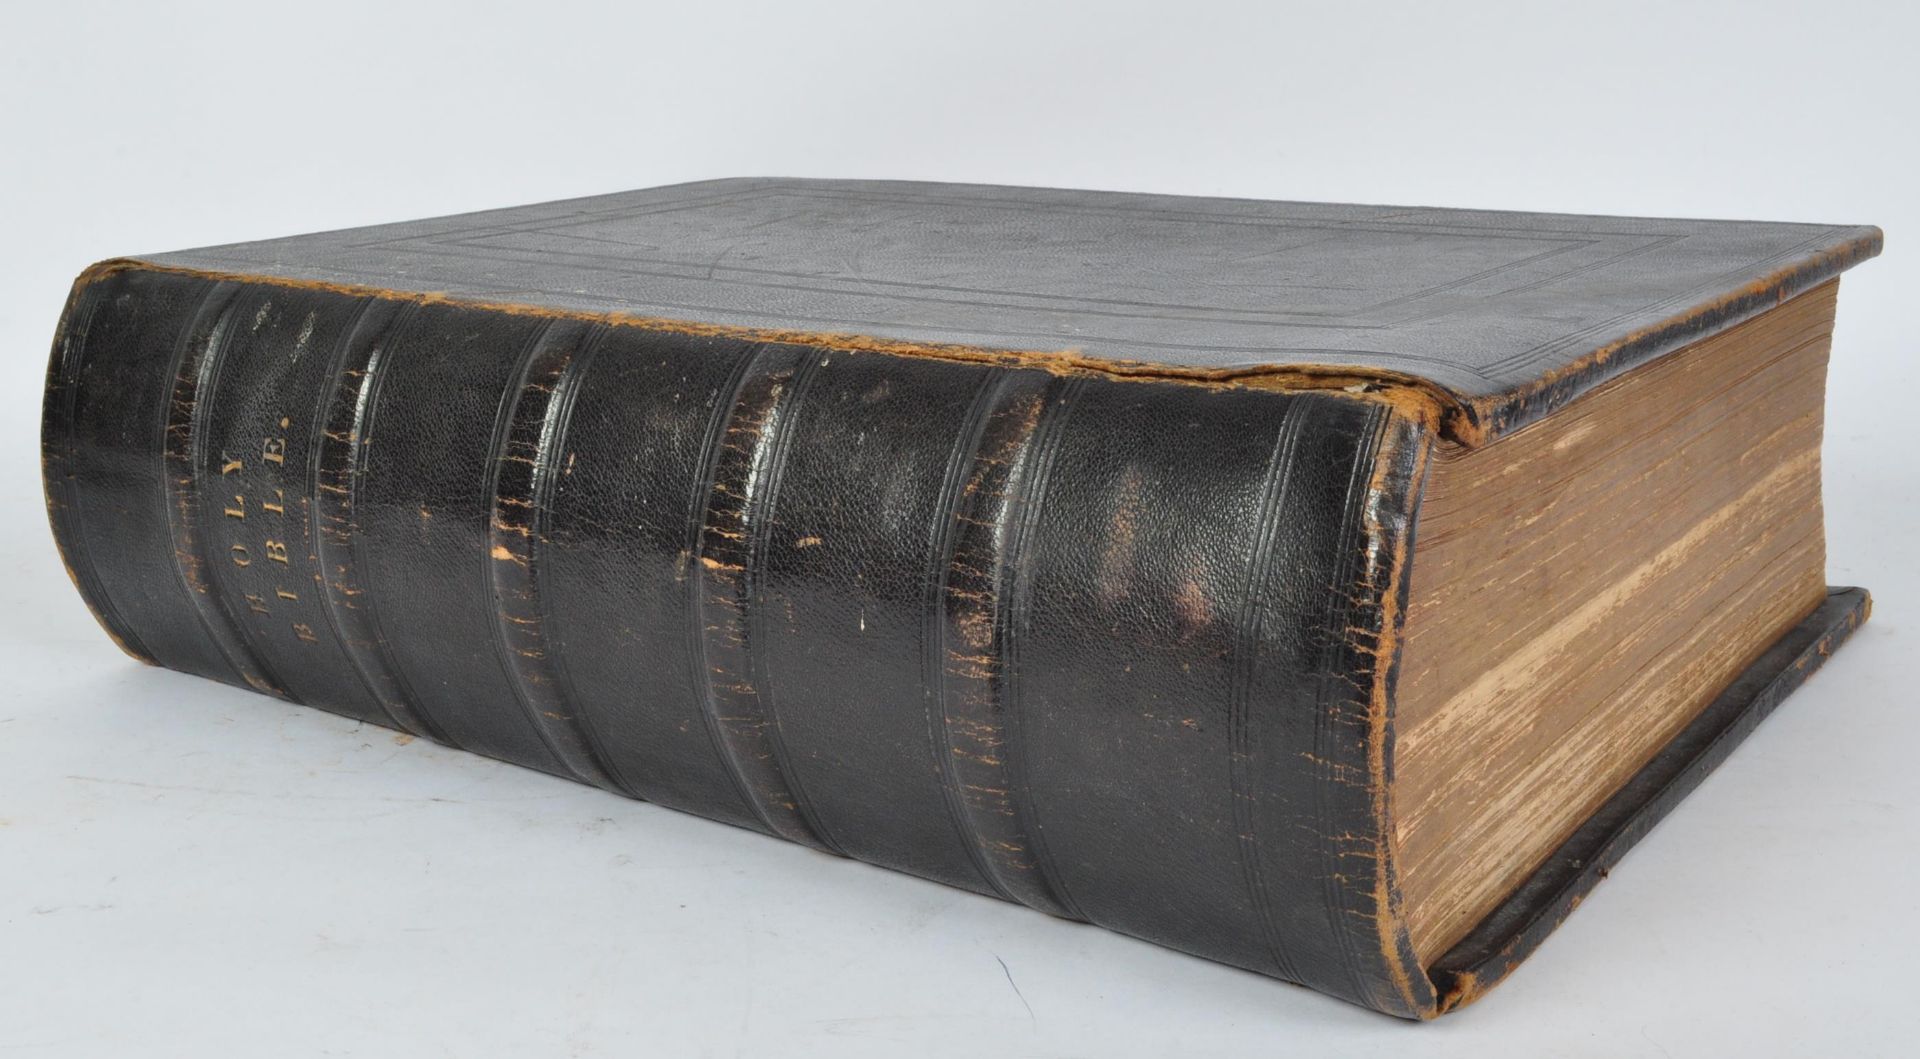 LARGE 19TH CENTURY THE UNIVERSAL FAMILY BIBLE - TOOLED LEATHER